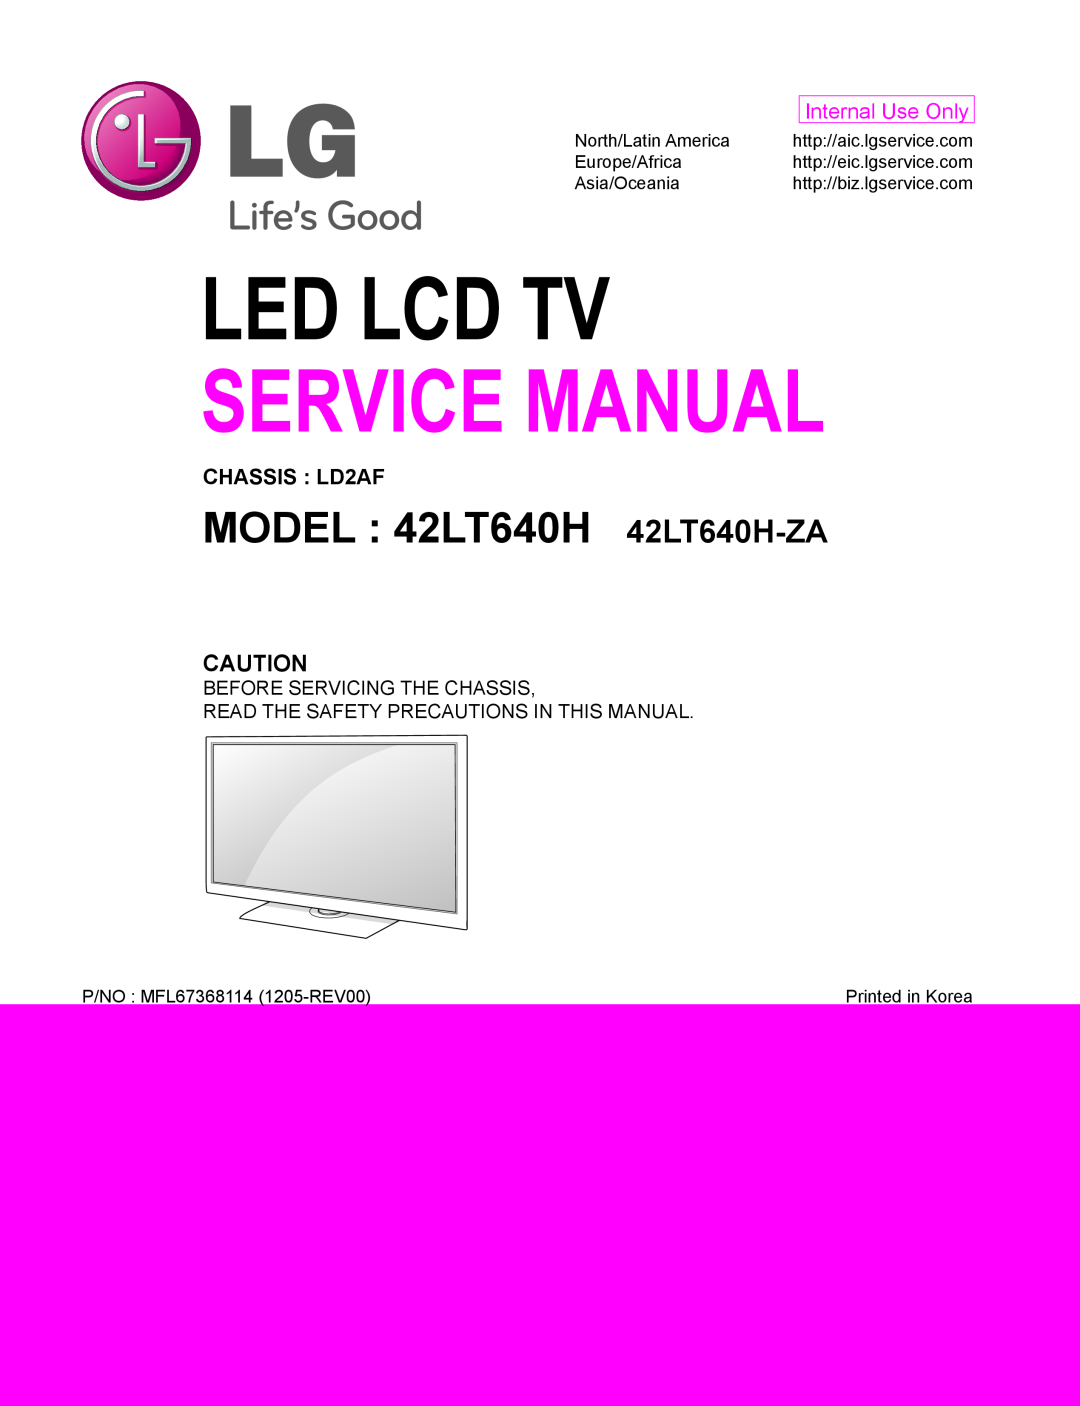 LG Electronics service manual MODEL 42LT640H 42LT640H-ZA, CHASSIS LD2AF, Before Servicing The Chassis, Europe/Africa 